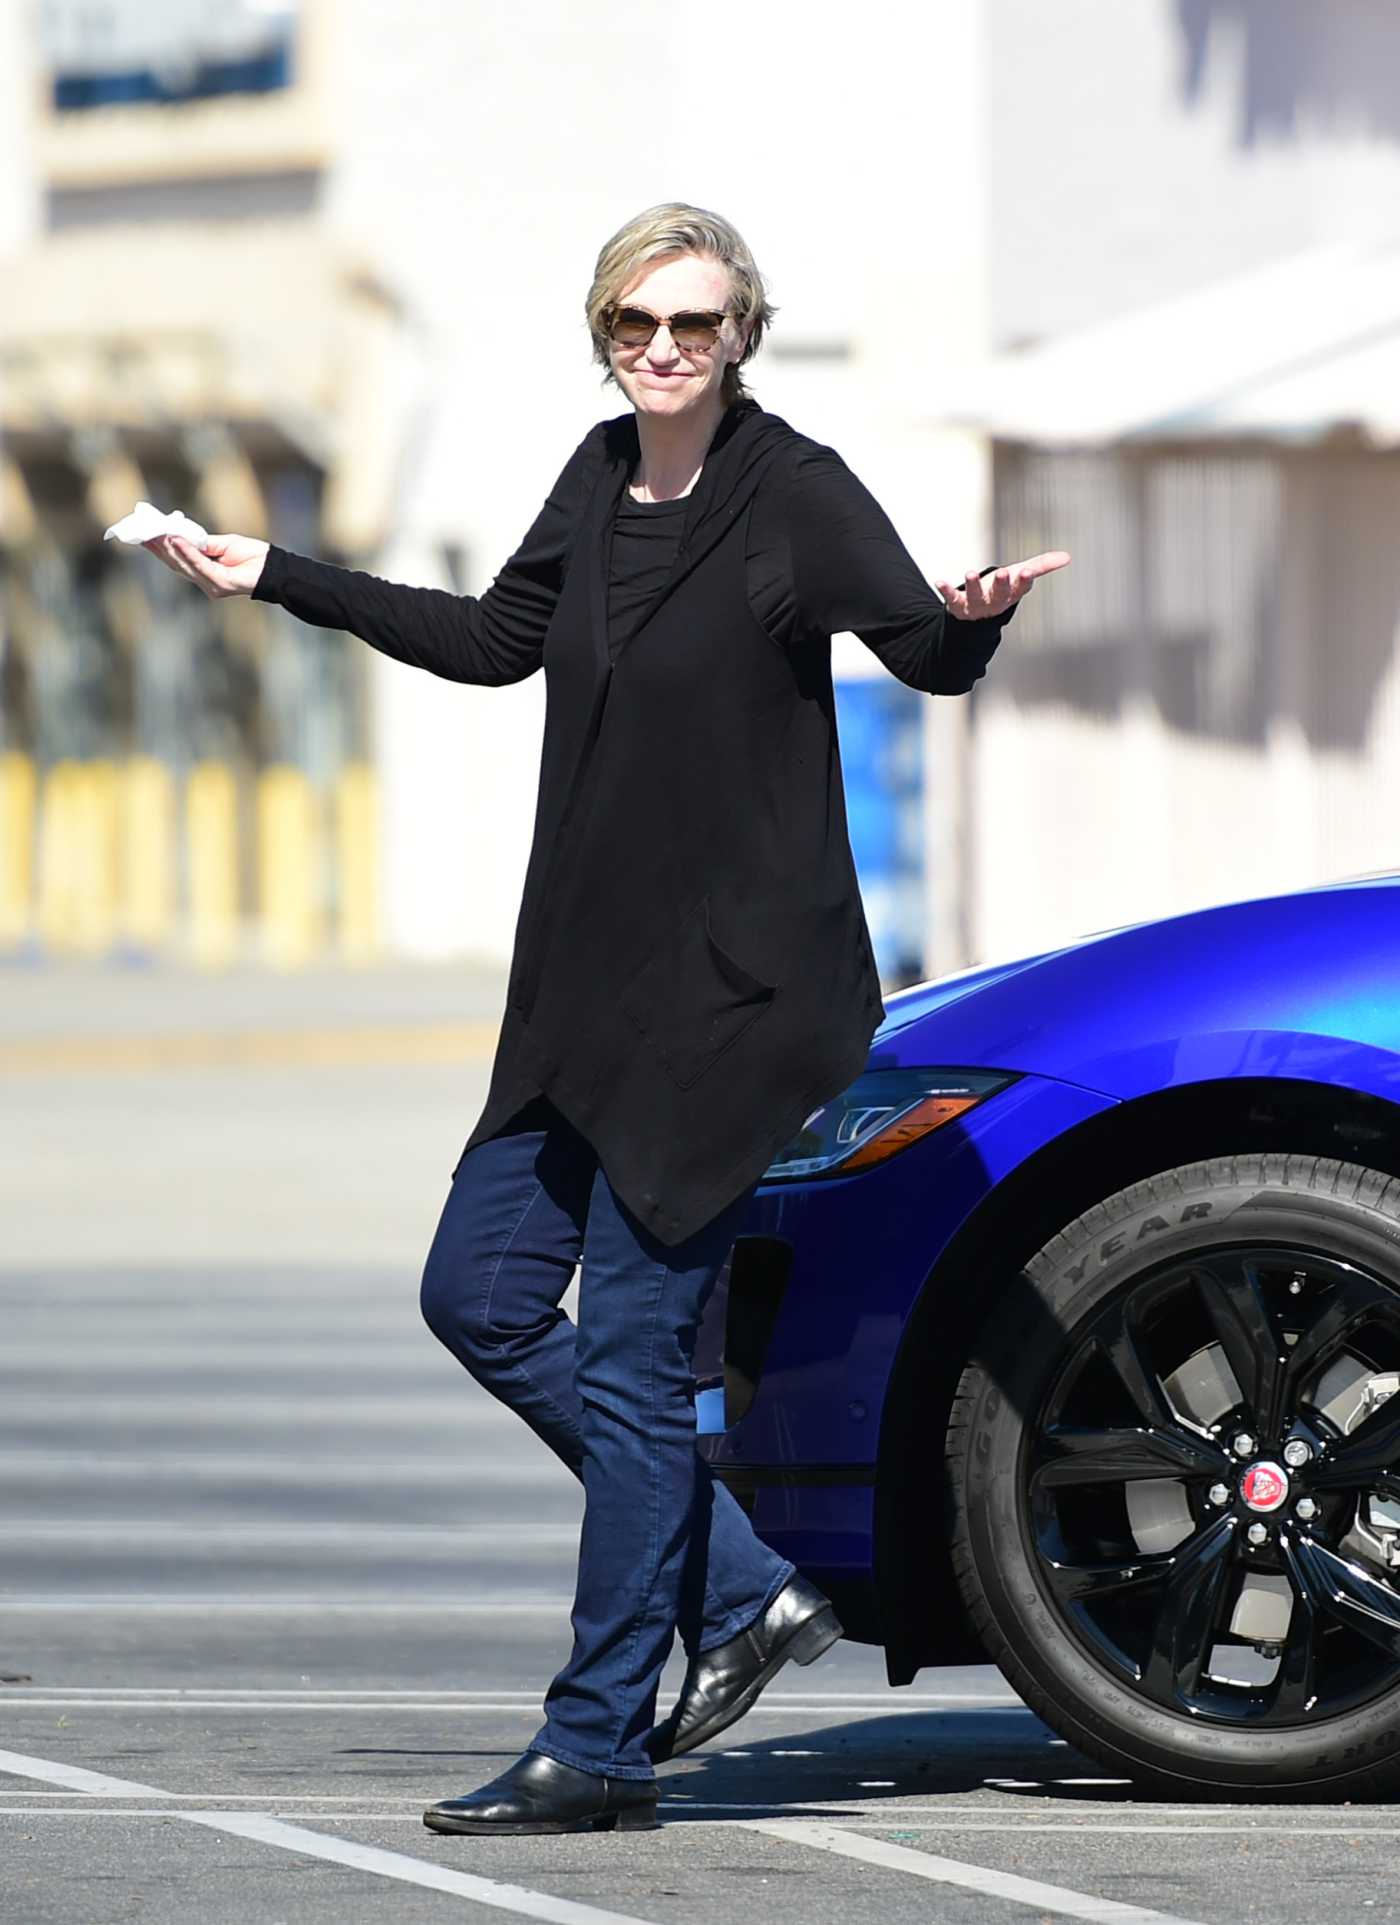 Jane Lynch Wipes Down Her Brand New Jaguar During the COVID-19 Lockdown in Los Angeles 04/25/2020